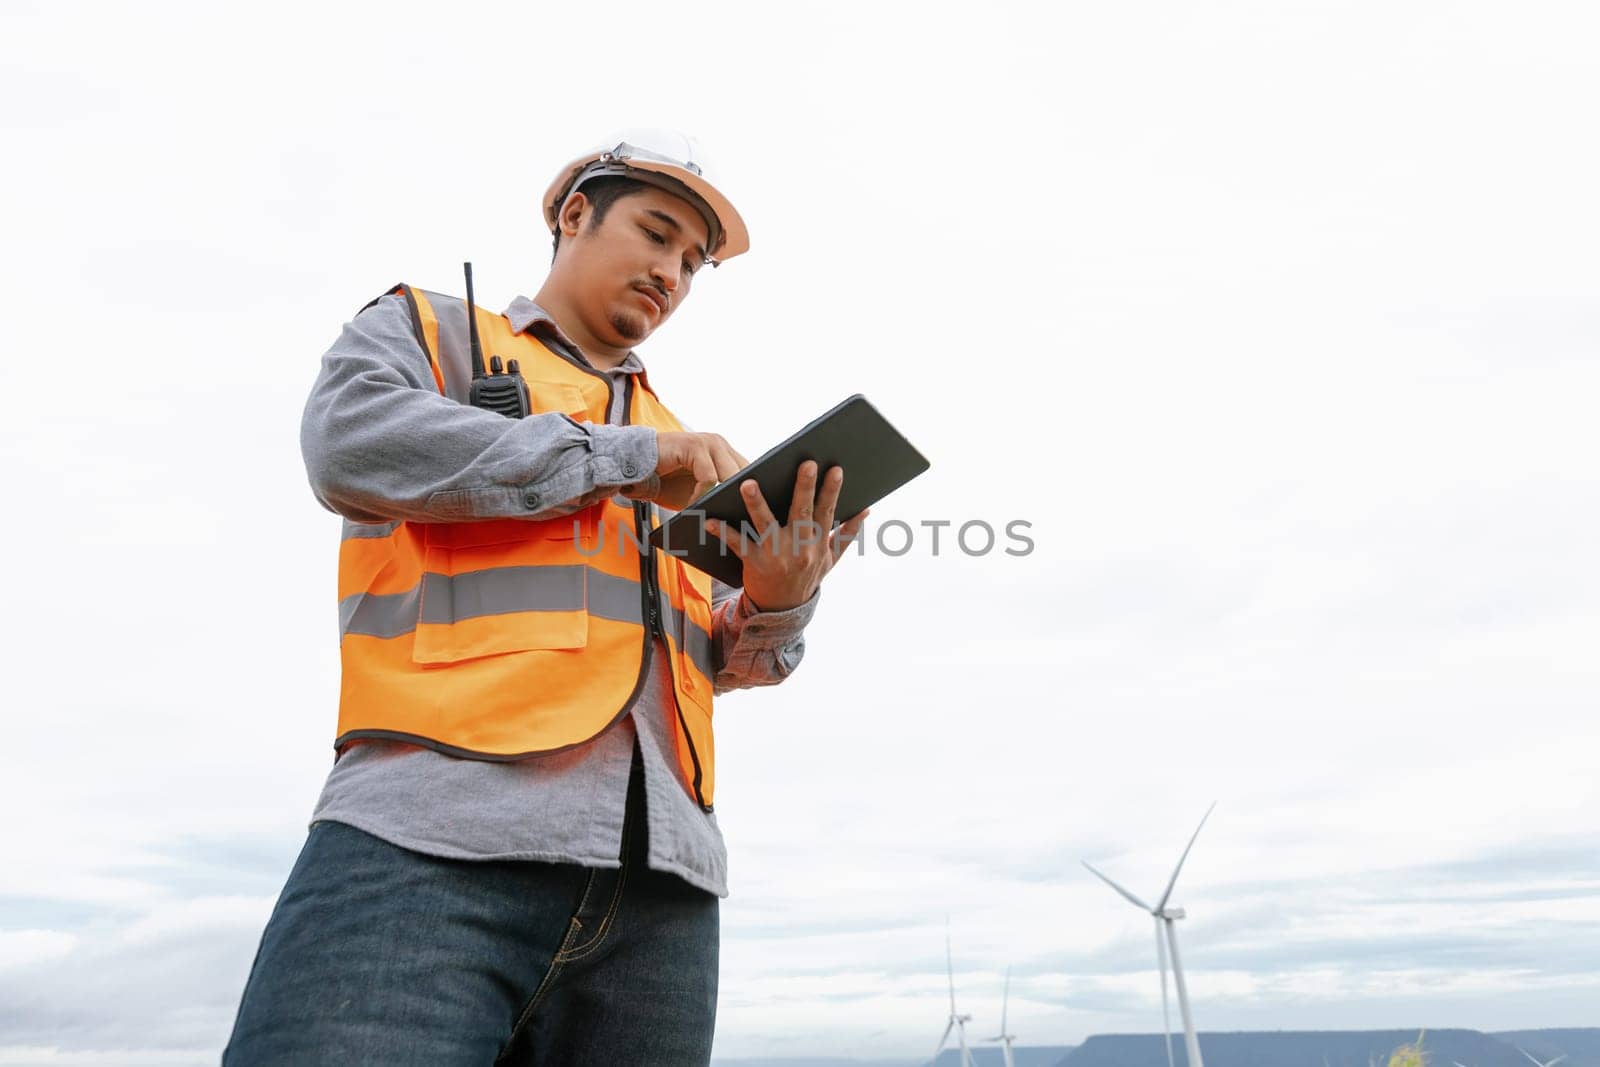 Engineer working on a wind farm atop a hill or mountain in the rural. Progressive ideal for the future production of renewable, sustainable energy. Energy generation from wind turbine.